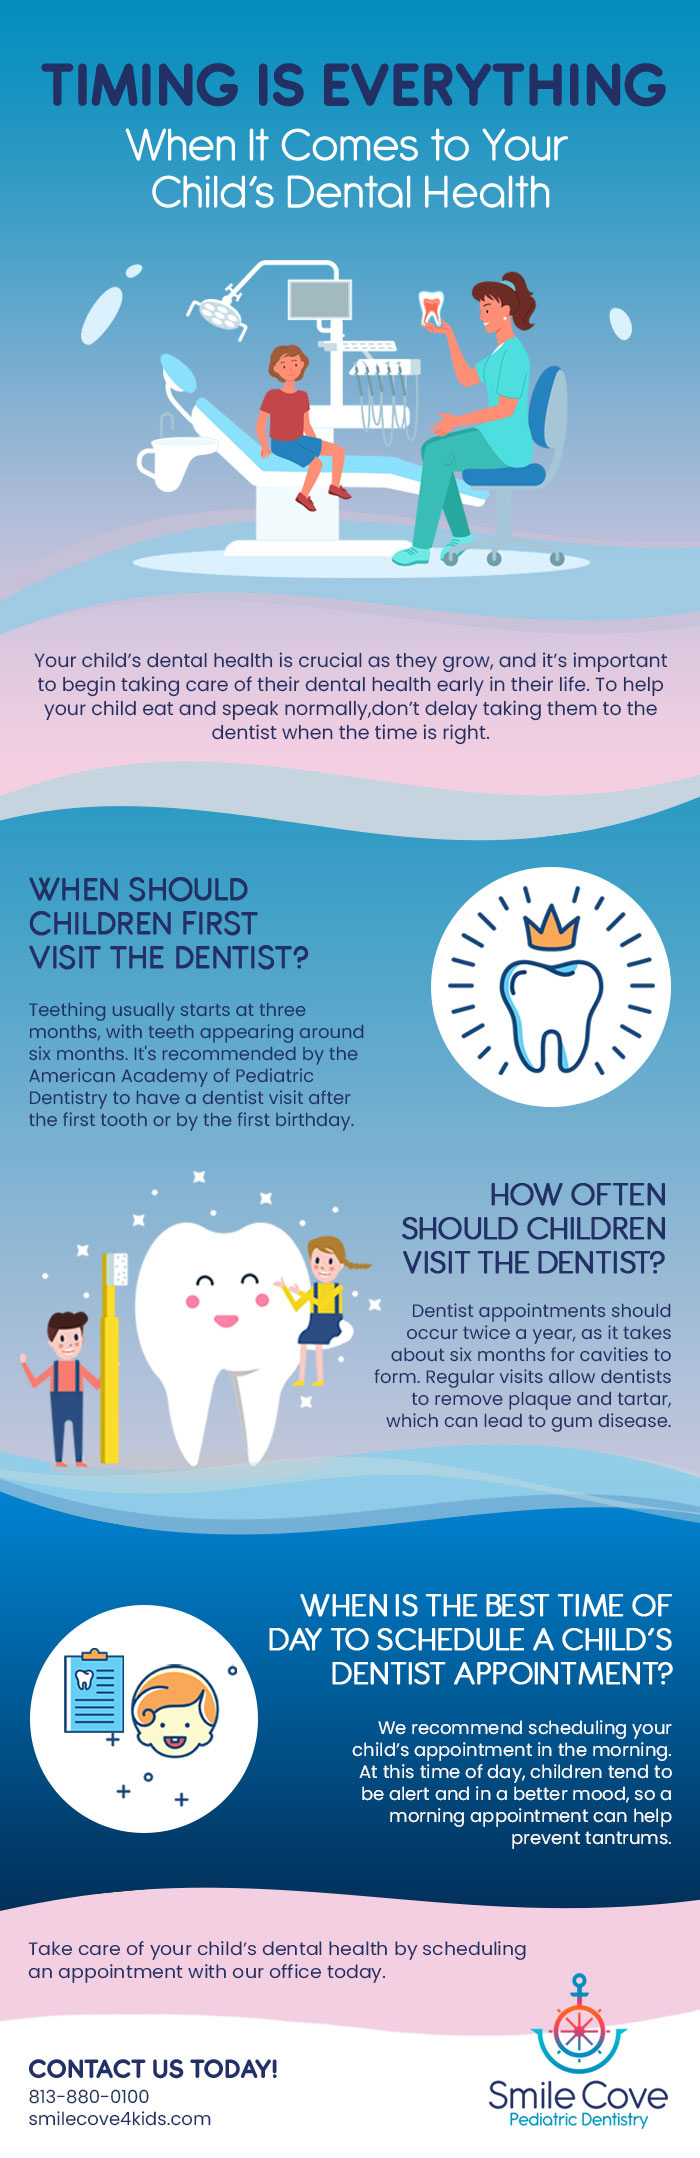 Timing Is Everything When It Comes to Your Child’s Dental Health